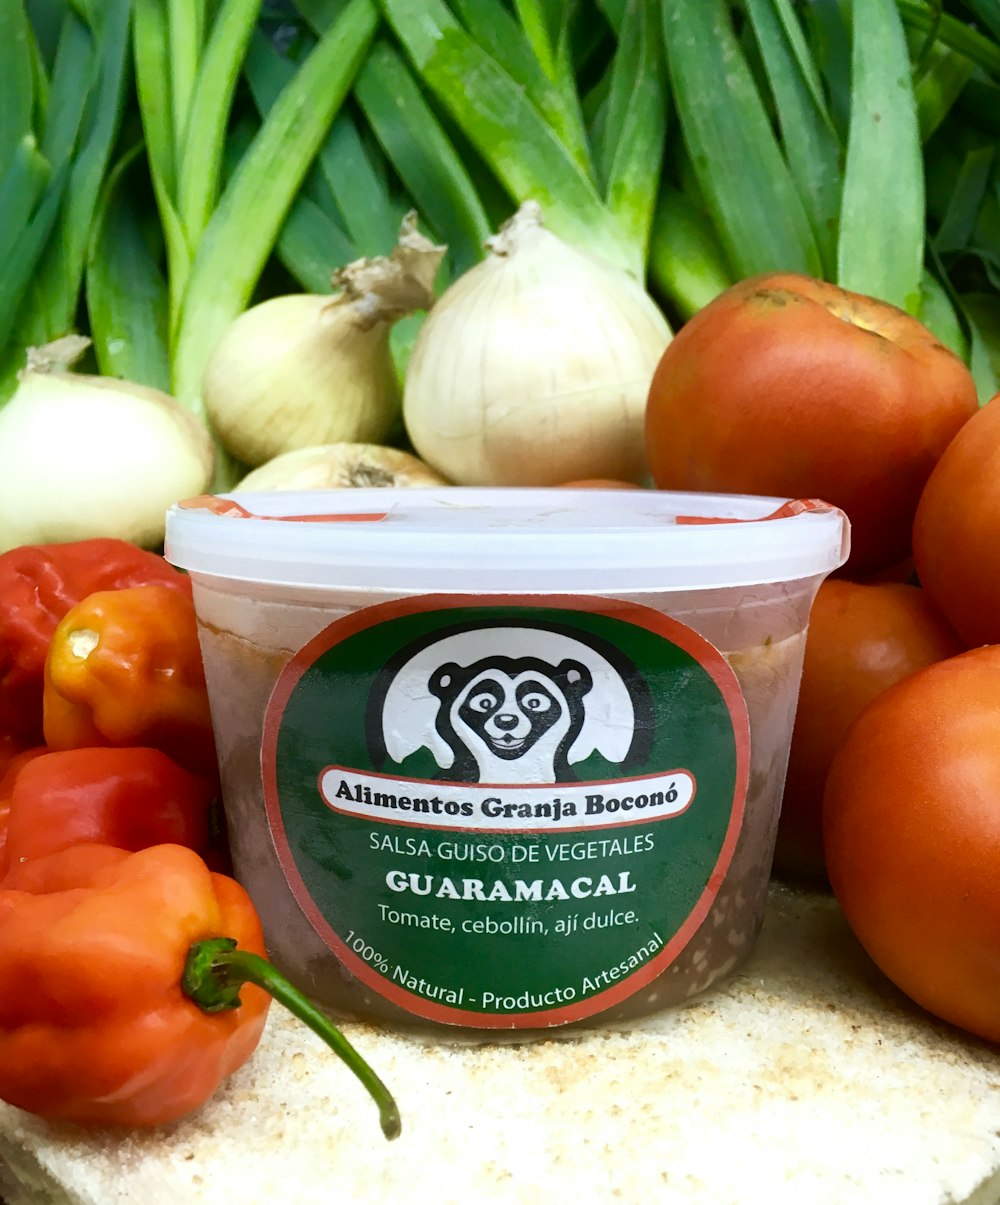 Guaramacal container